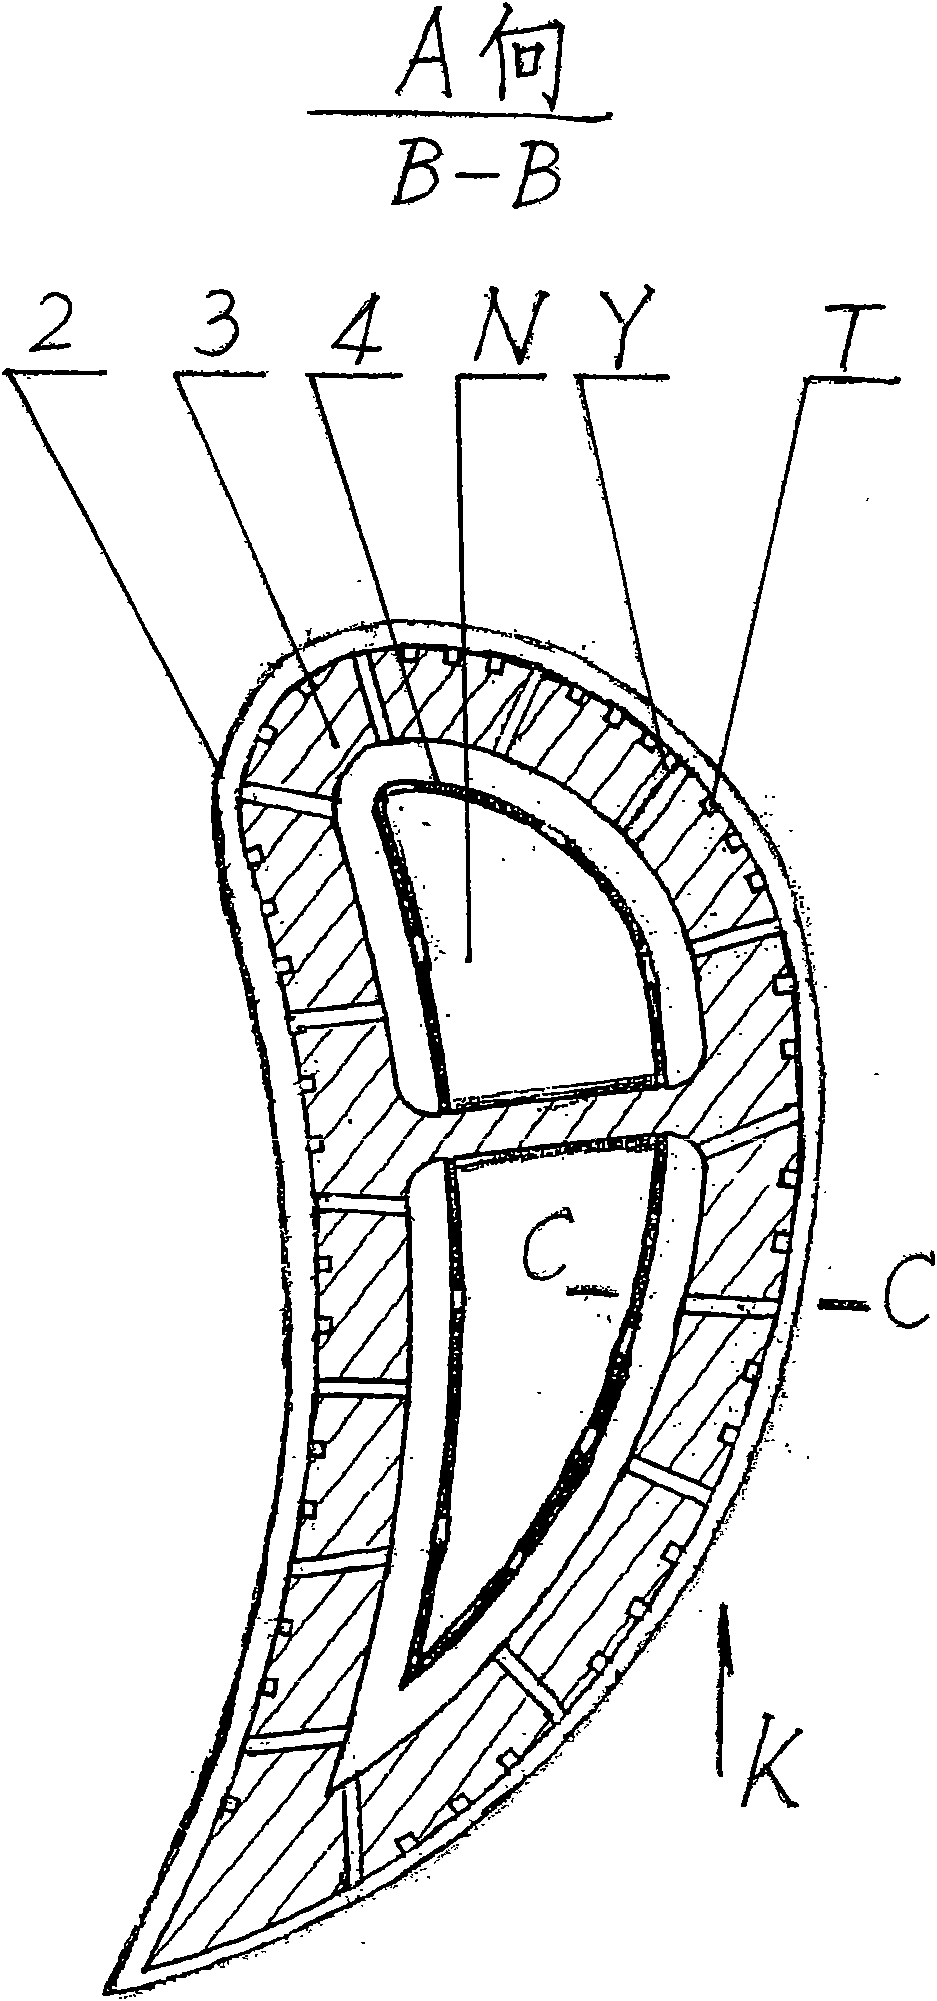 Clustered shunt type thermal protection for turbine rotor blade of aeroengine